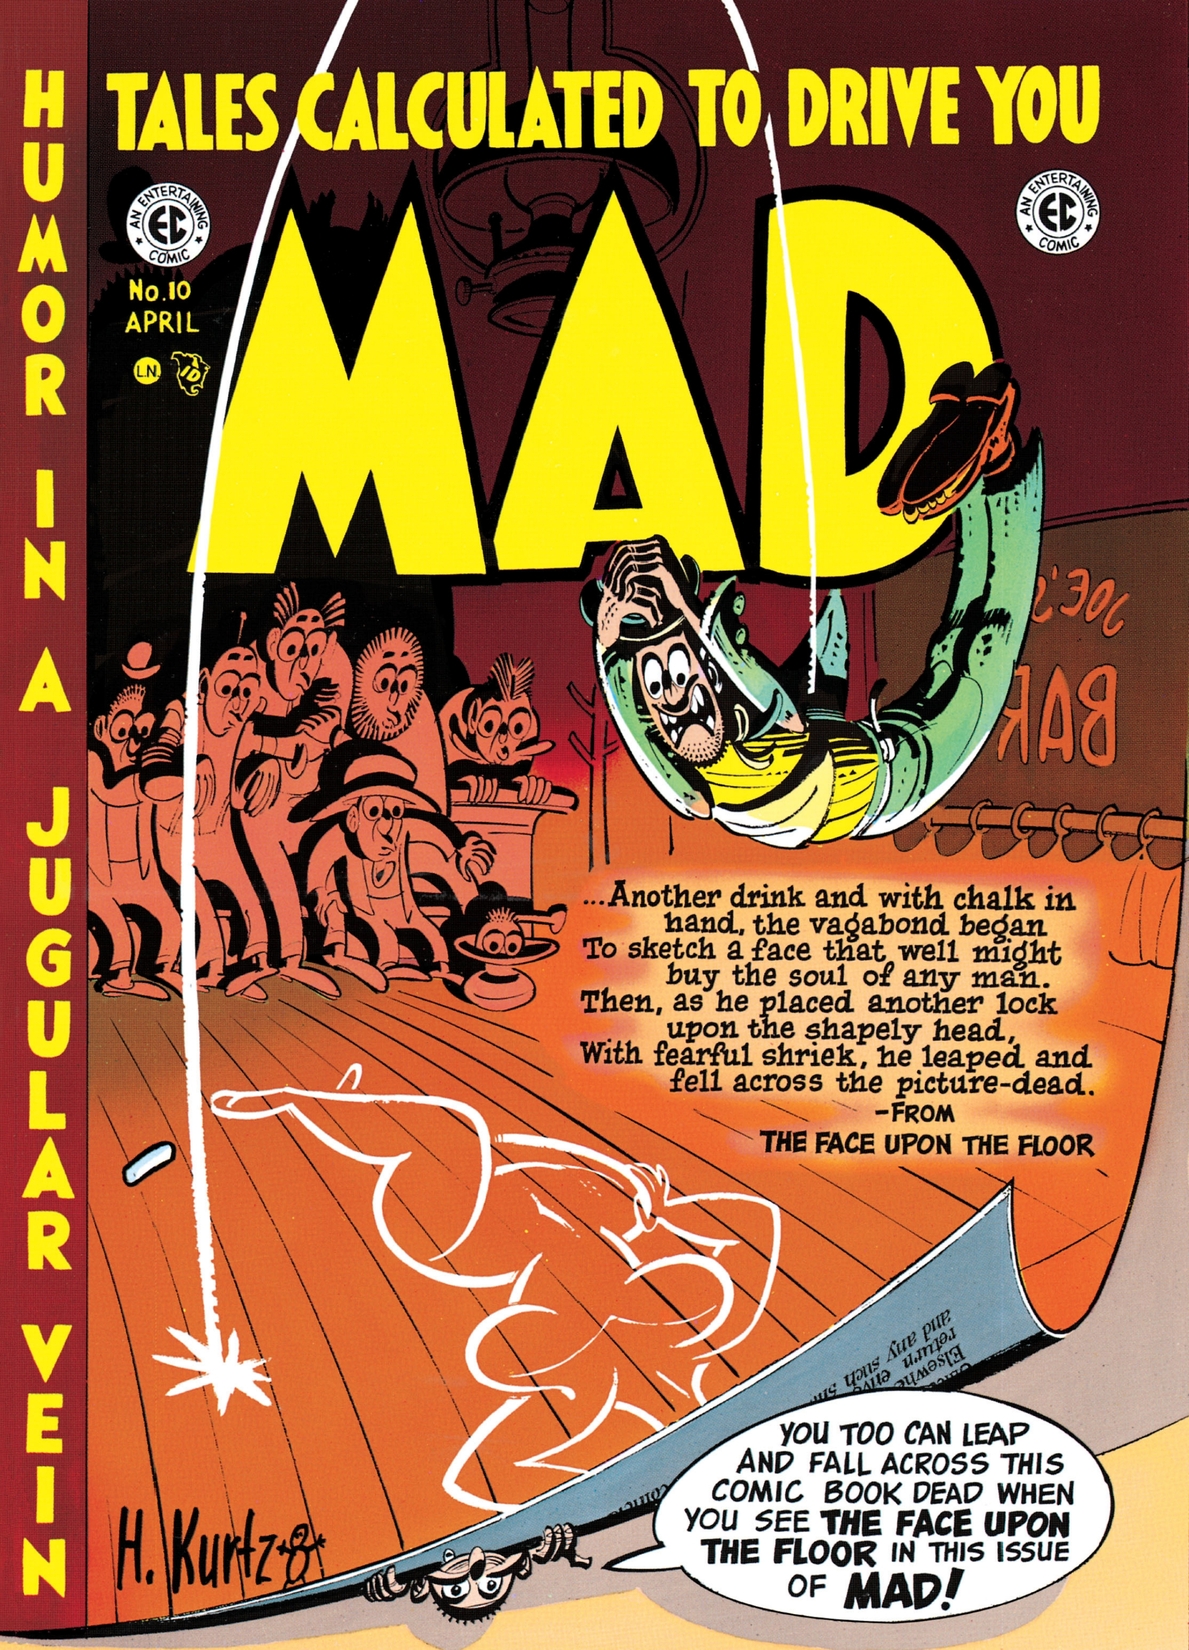 MAD Magazine #10 preview images